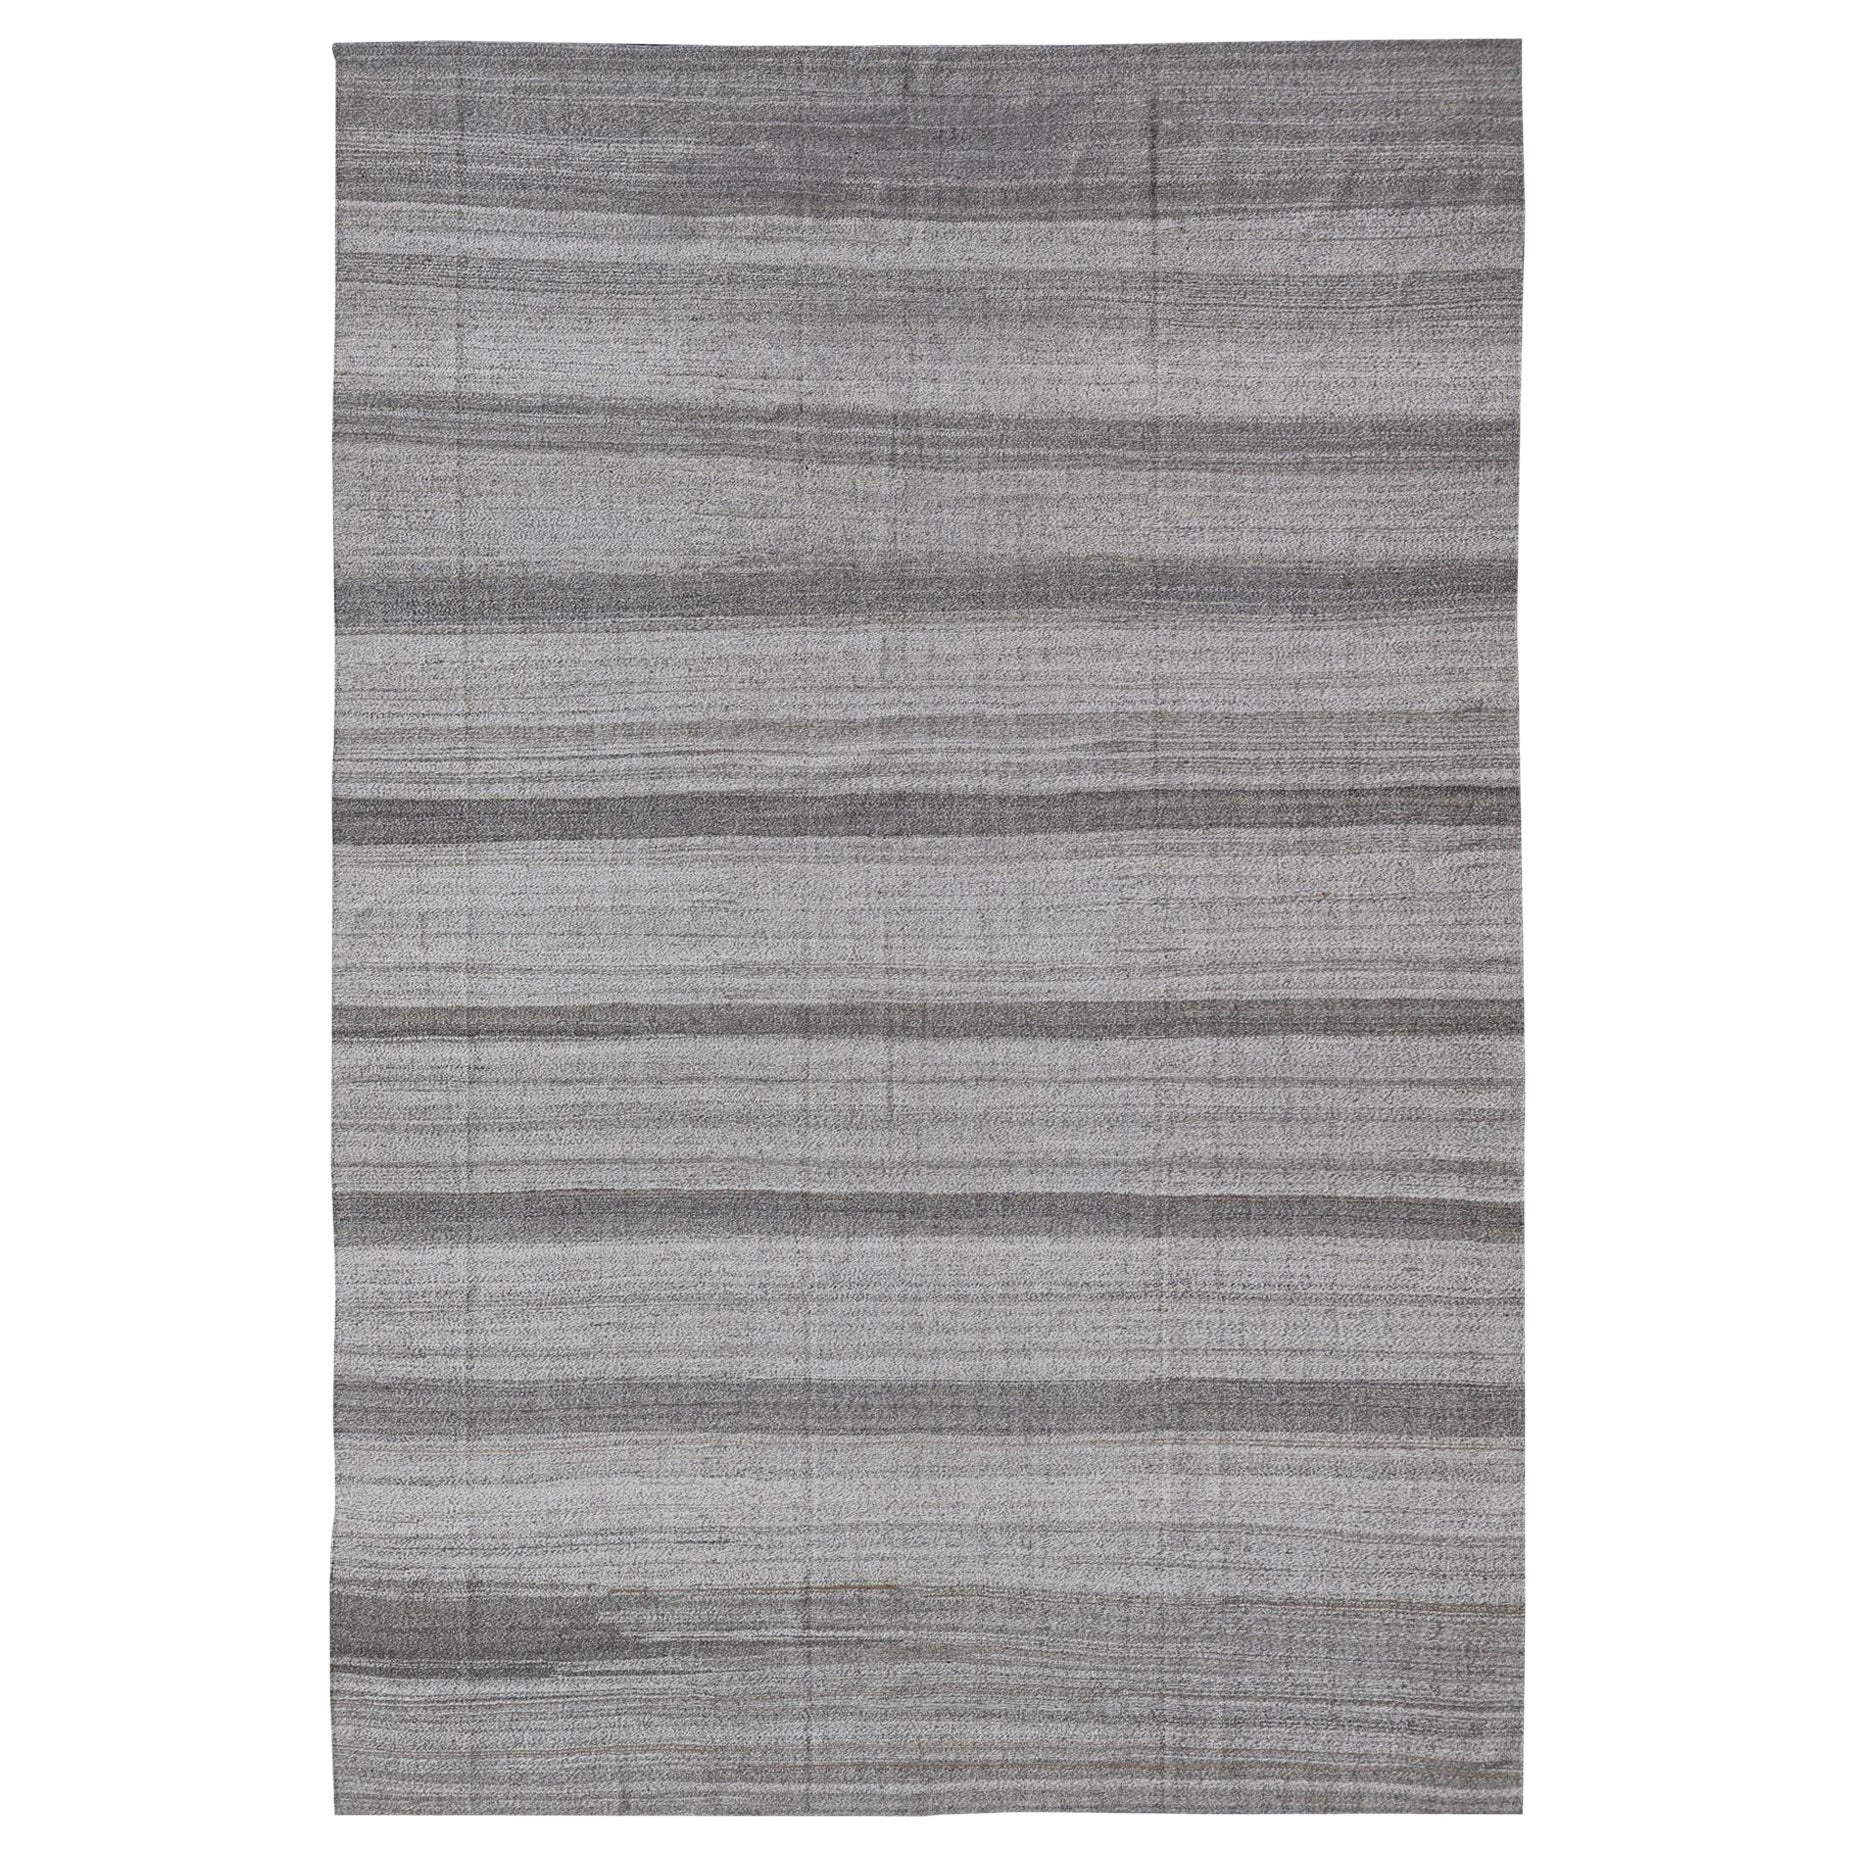  Modern Kilim Rug with Stripes in Neutral tones Shades of Gray 